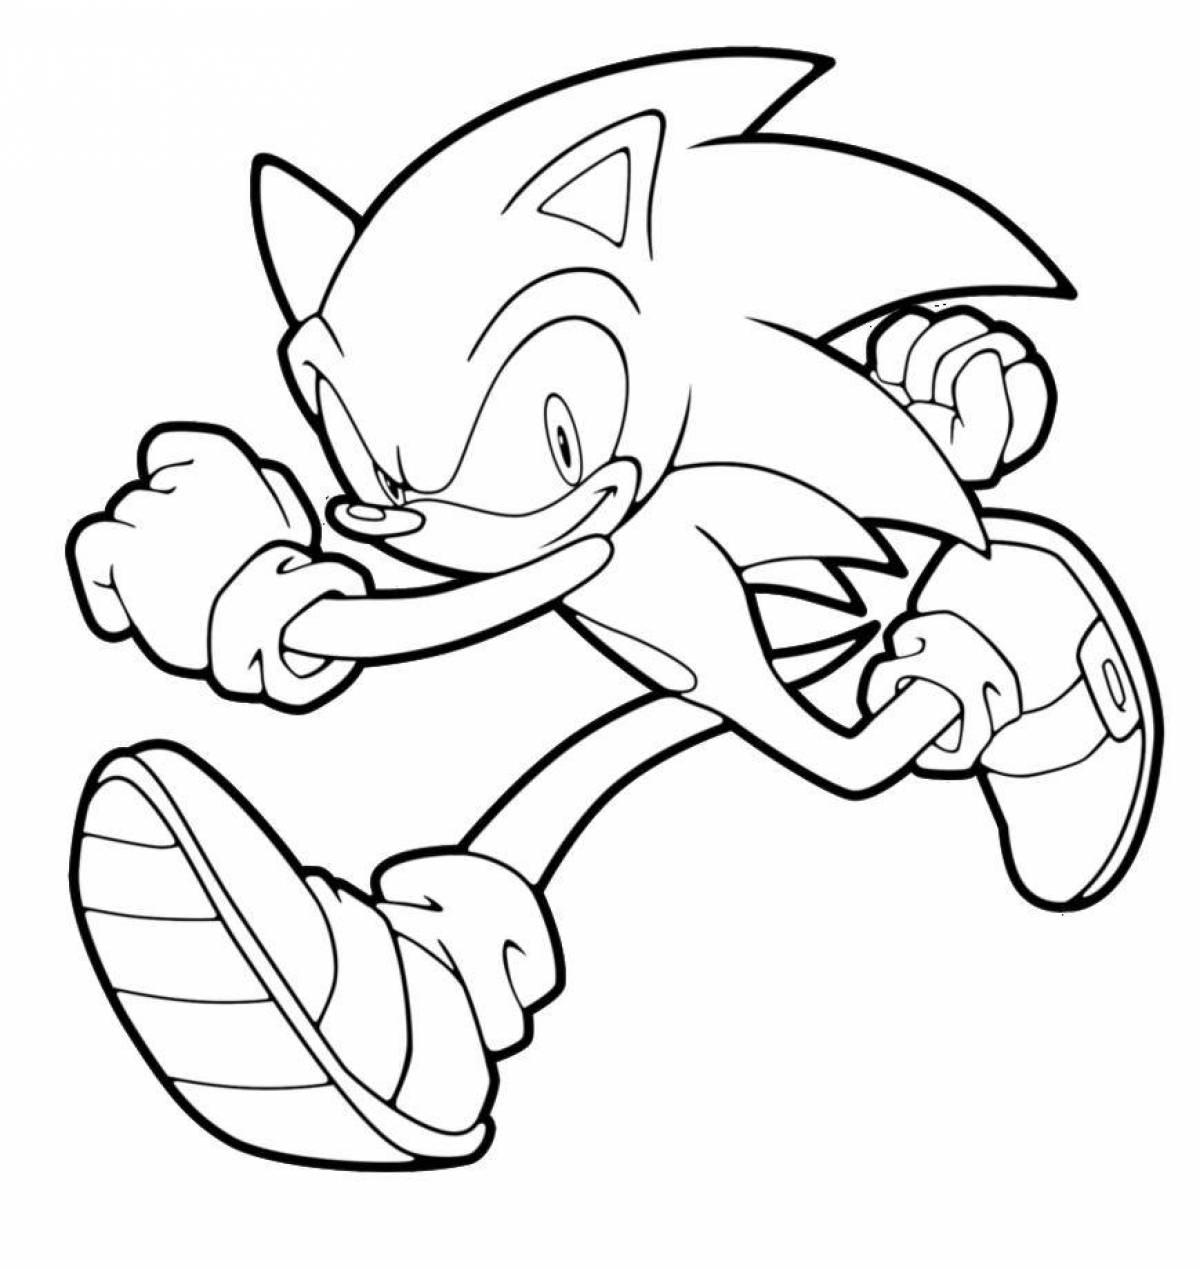 Live coloring sonic in the car